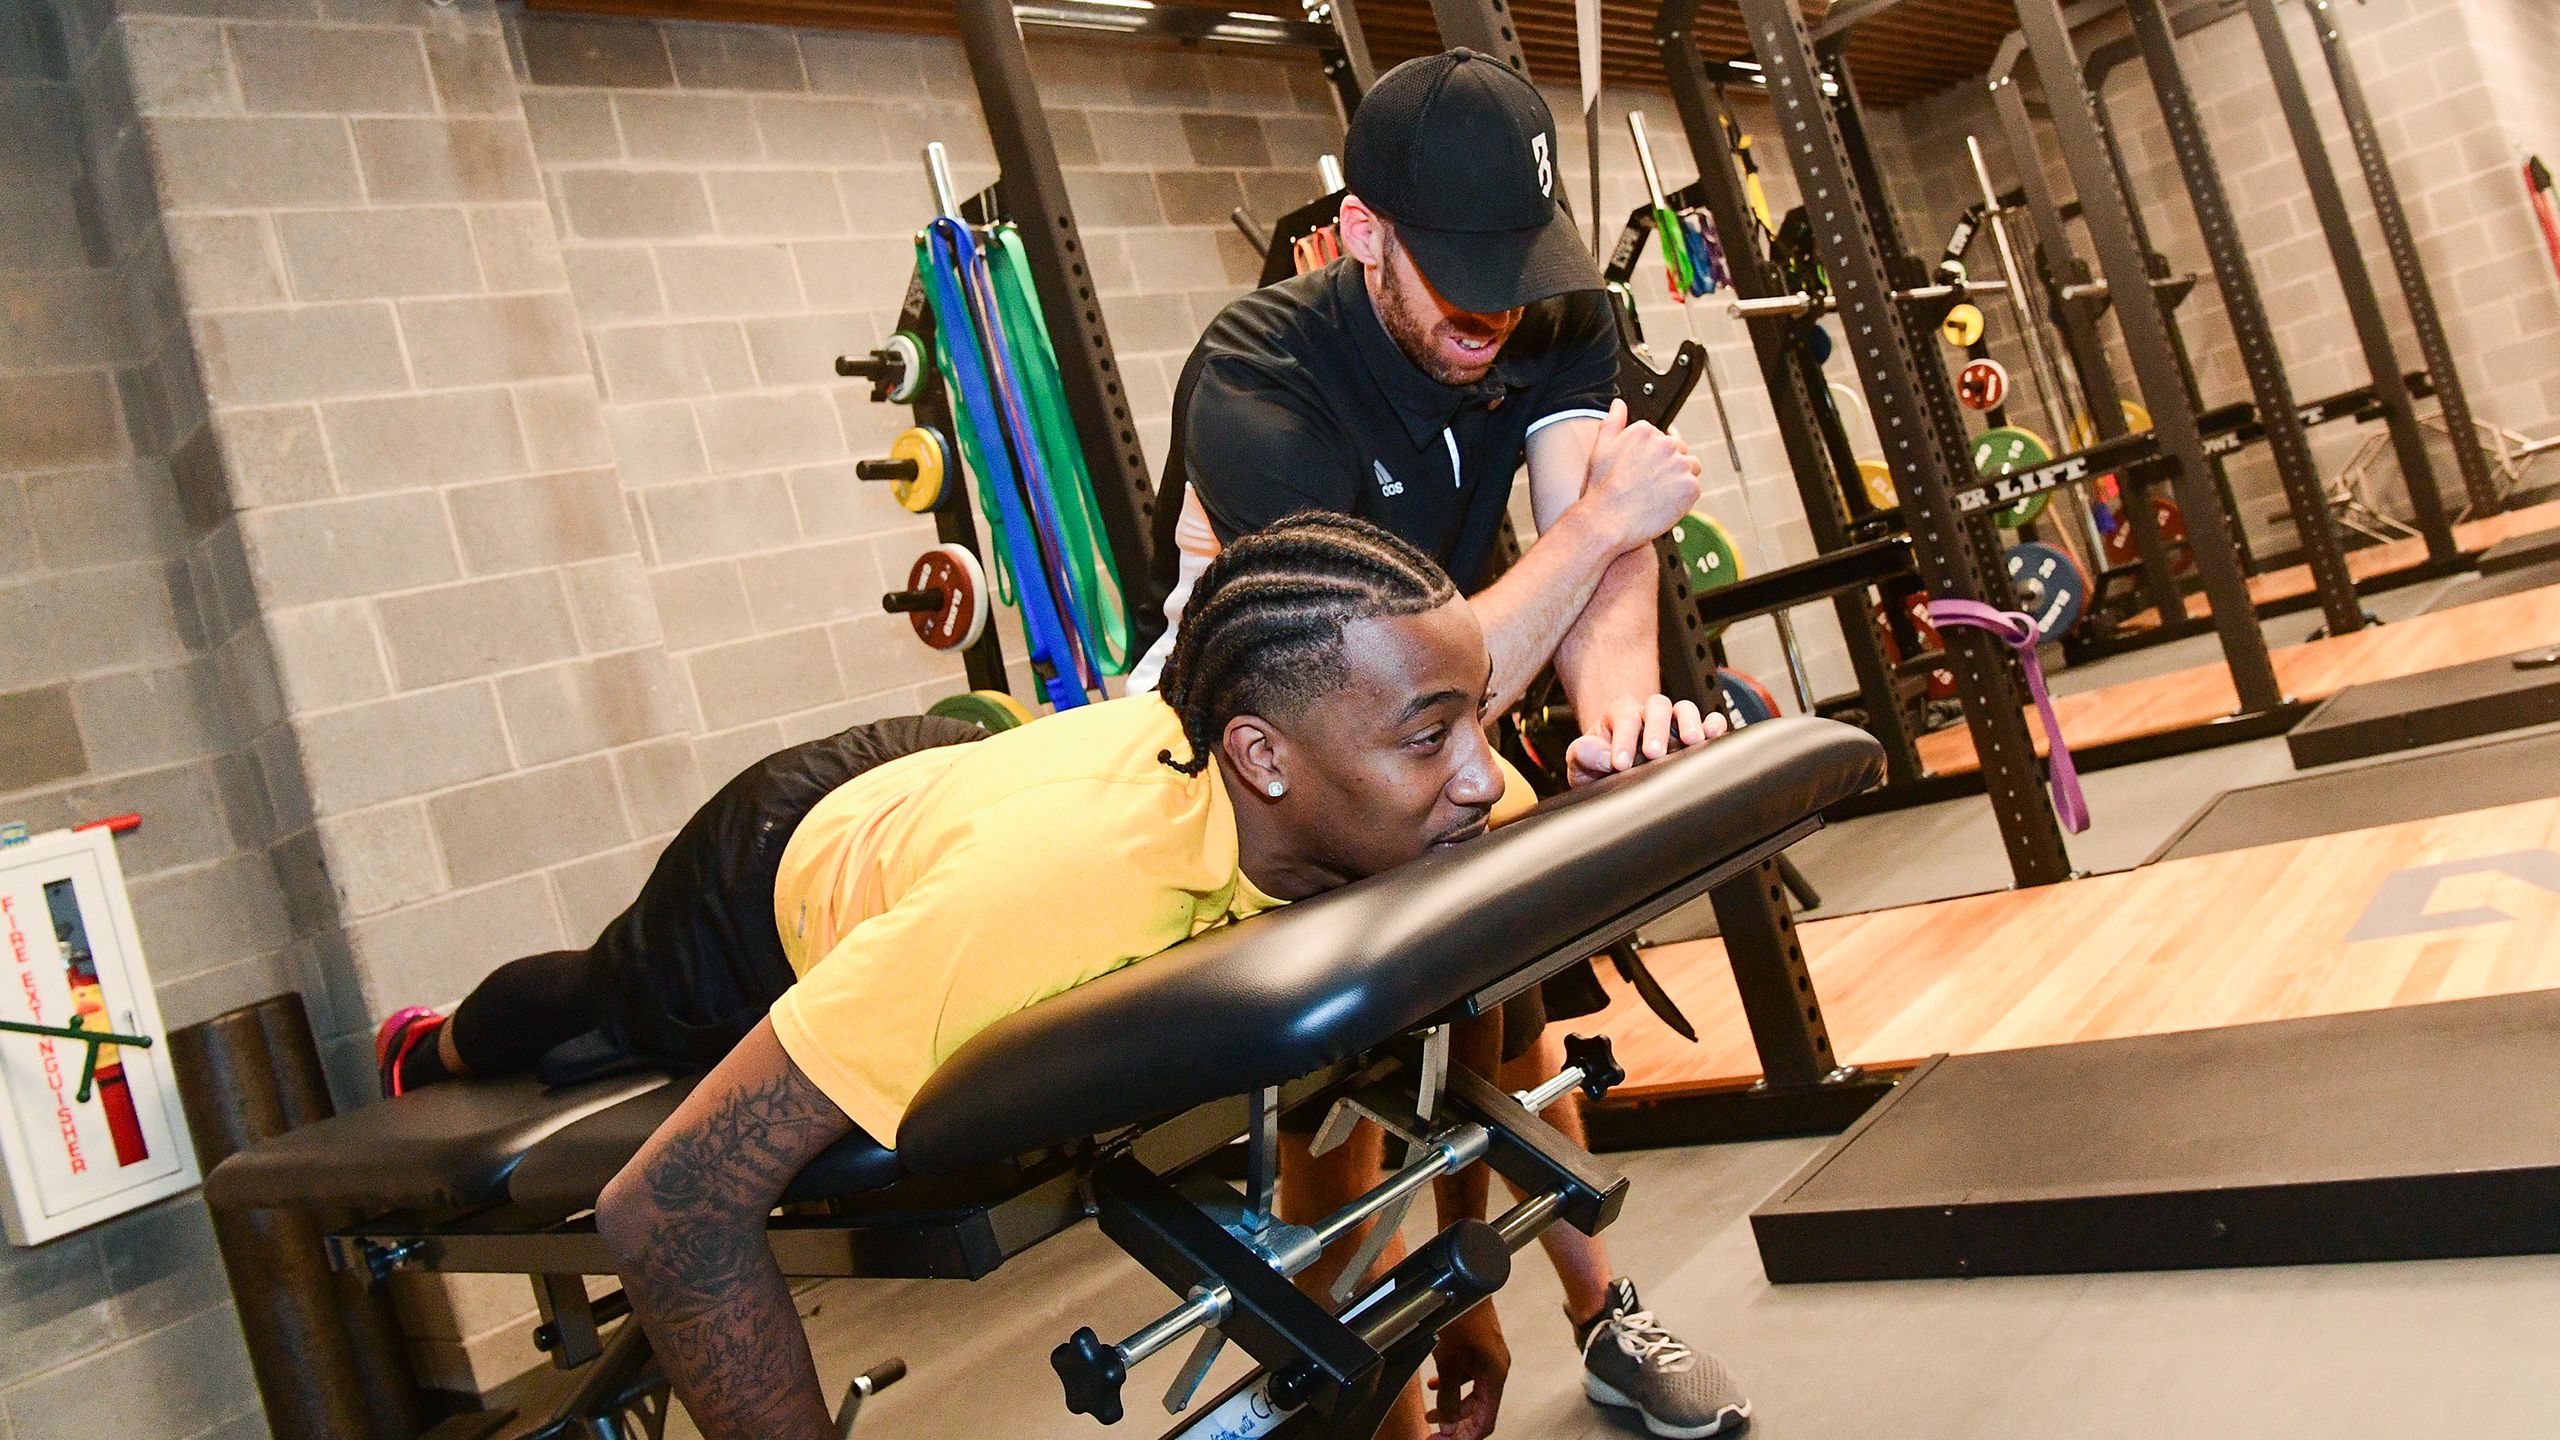 NBA basketball player Jordan McRae is being massaged by a P3 trainer.